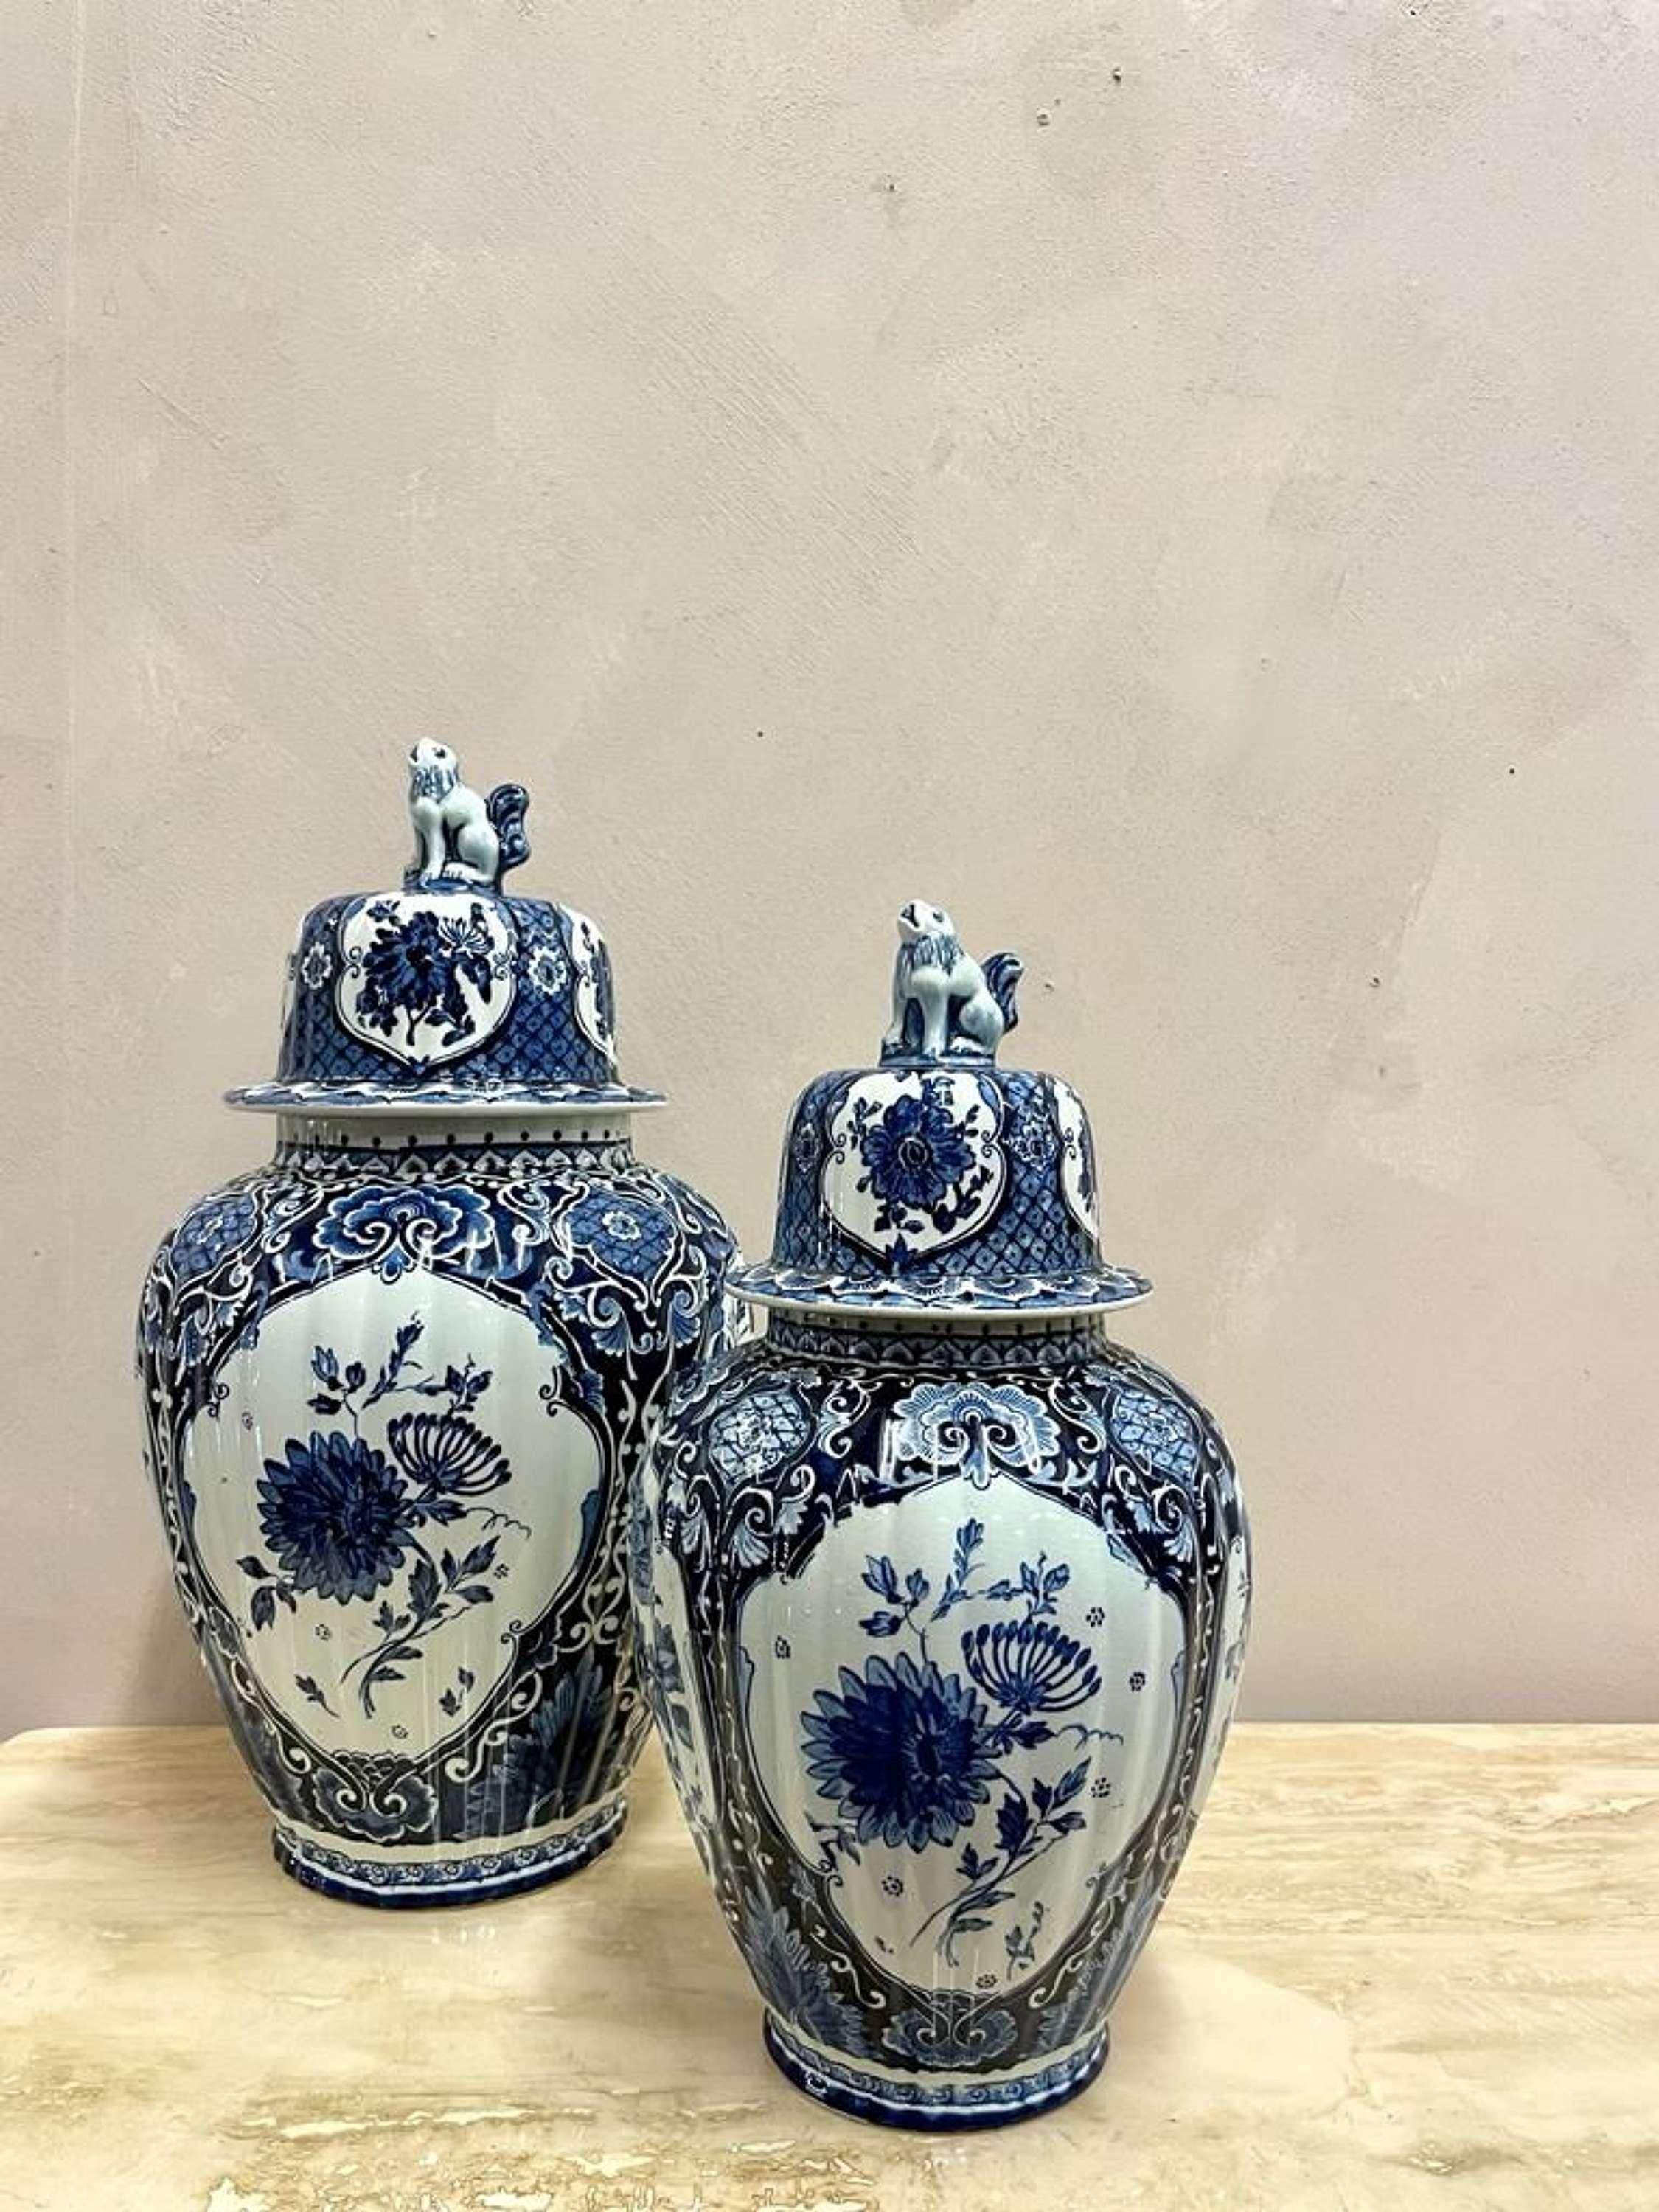 Late 19th Century Medium & Large Delft Ginger Jars with Covers by Petrous Regout For Sale 2